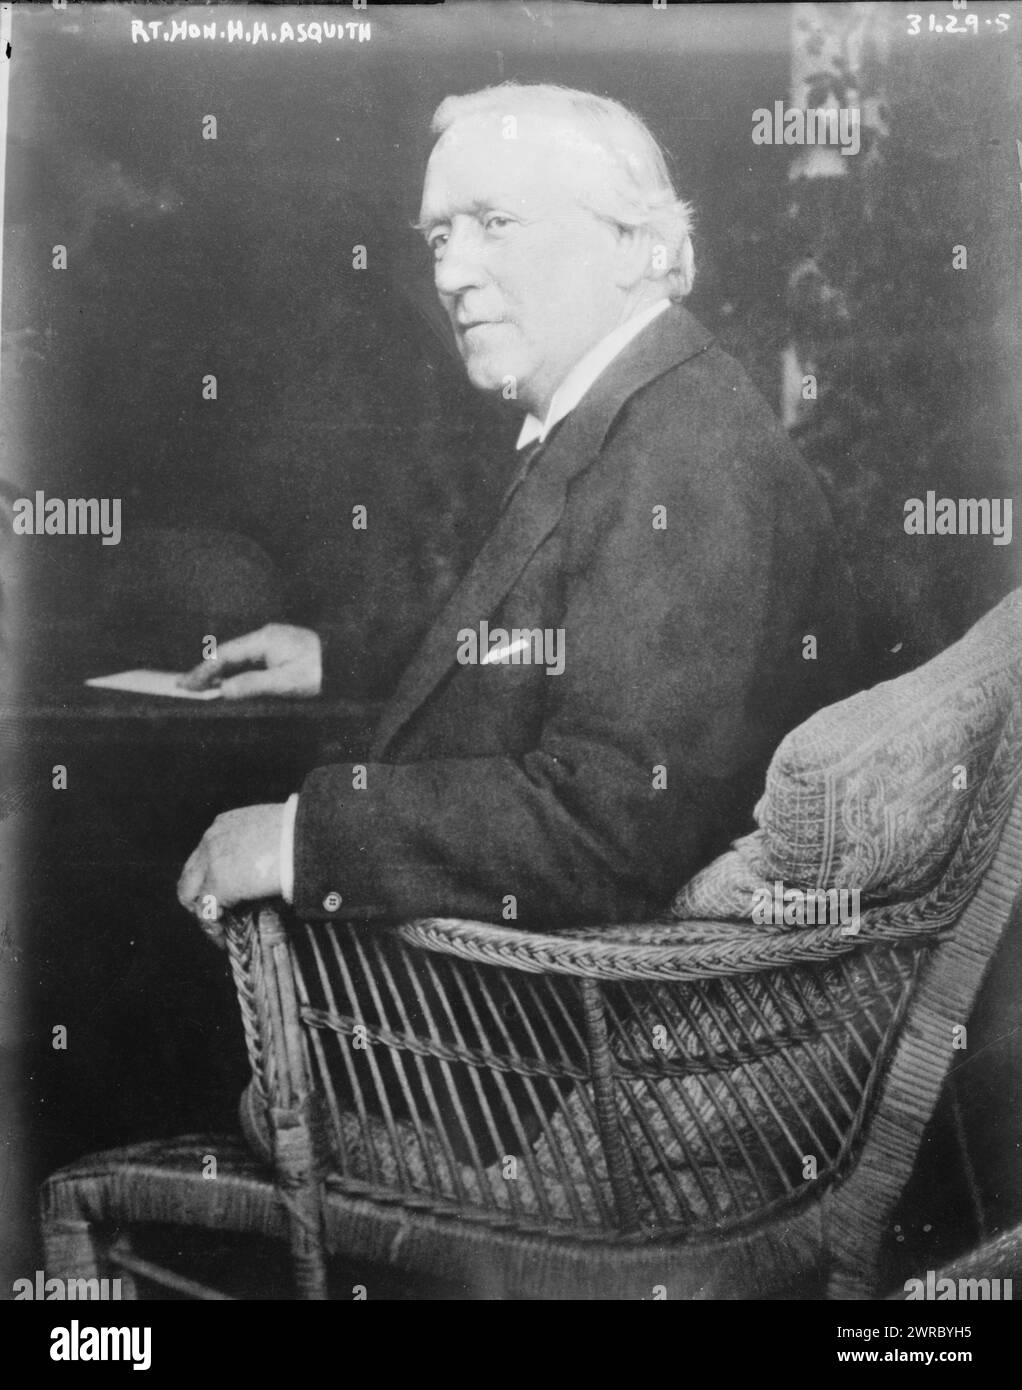 Rt. Hon. H.H. Asquith, Photograph shows Herbert Henry Asquith, 1st Earl of Oxford and Asquith, (1852-1928) who served as Prime Minister of the United Kingdom from 1908 to 1916., between ca. 1910 and ca. 1915, Glass negatives, 1 negative: glass Stock Photo